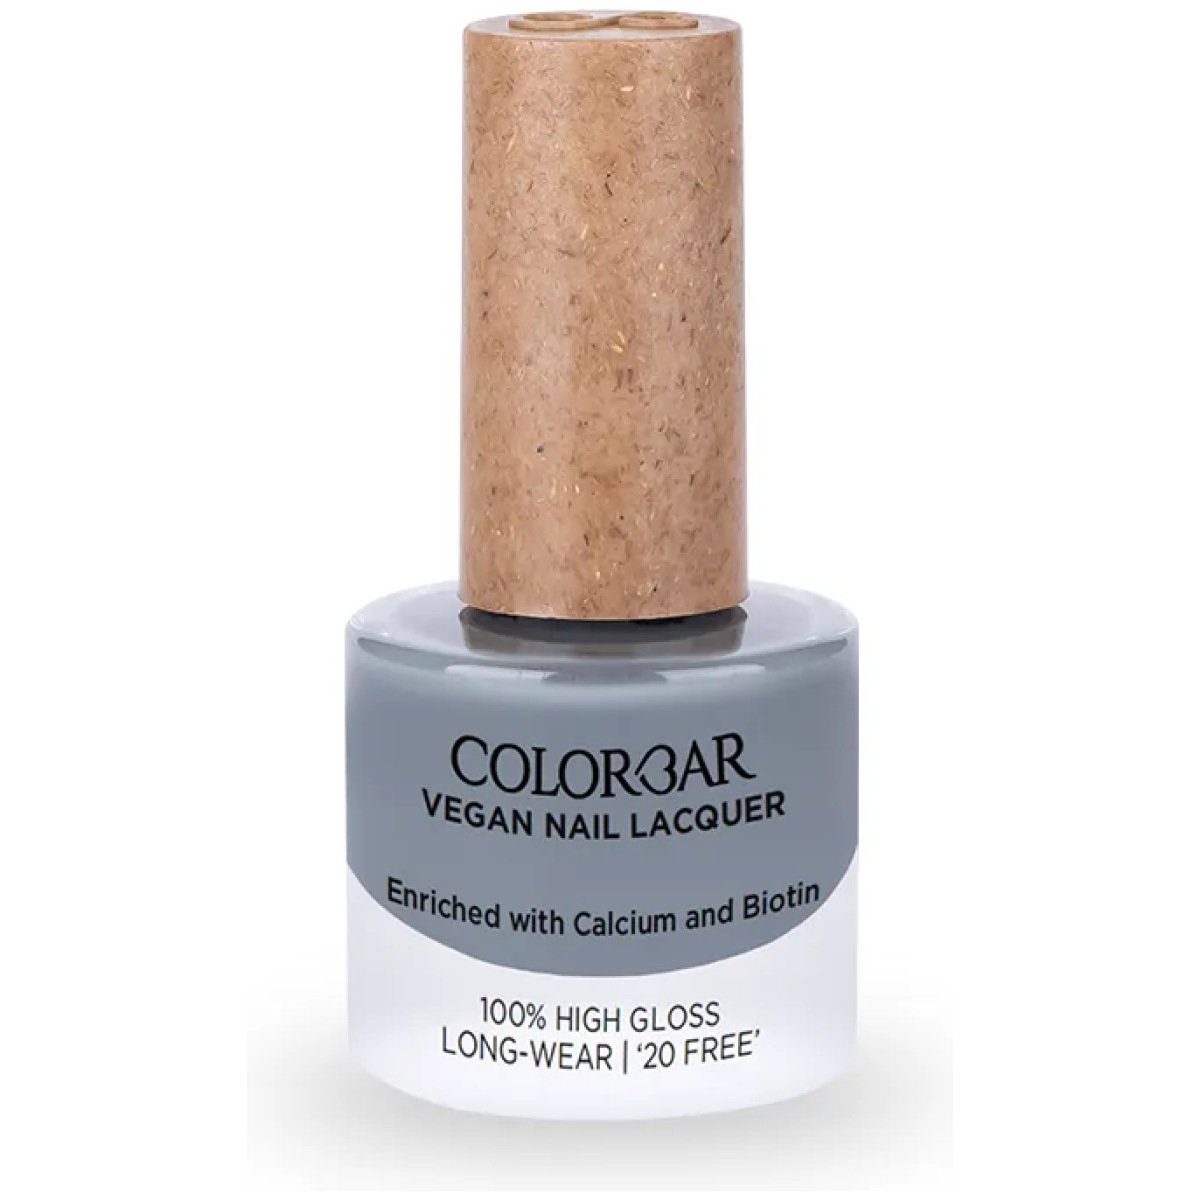 COLORBAR Nail Lacquer Plum Story - Price in India, Buy COLORBAR Nail Lacquer  Plum Story Online In India, Reviews, Ratings & Features | Flipkart.com